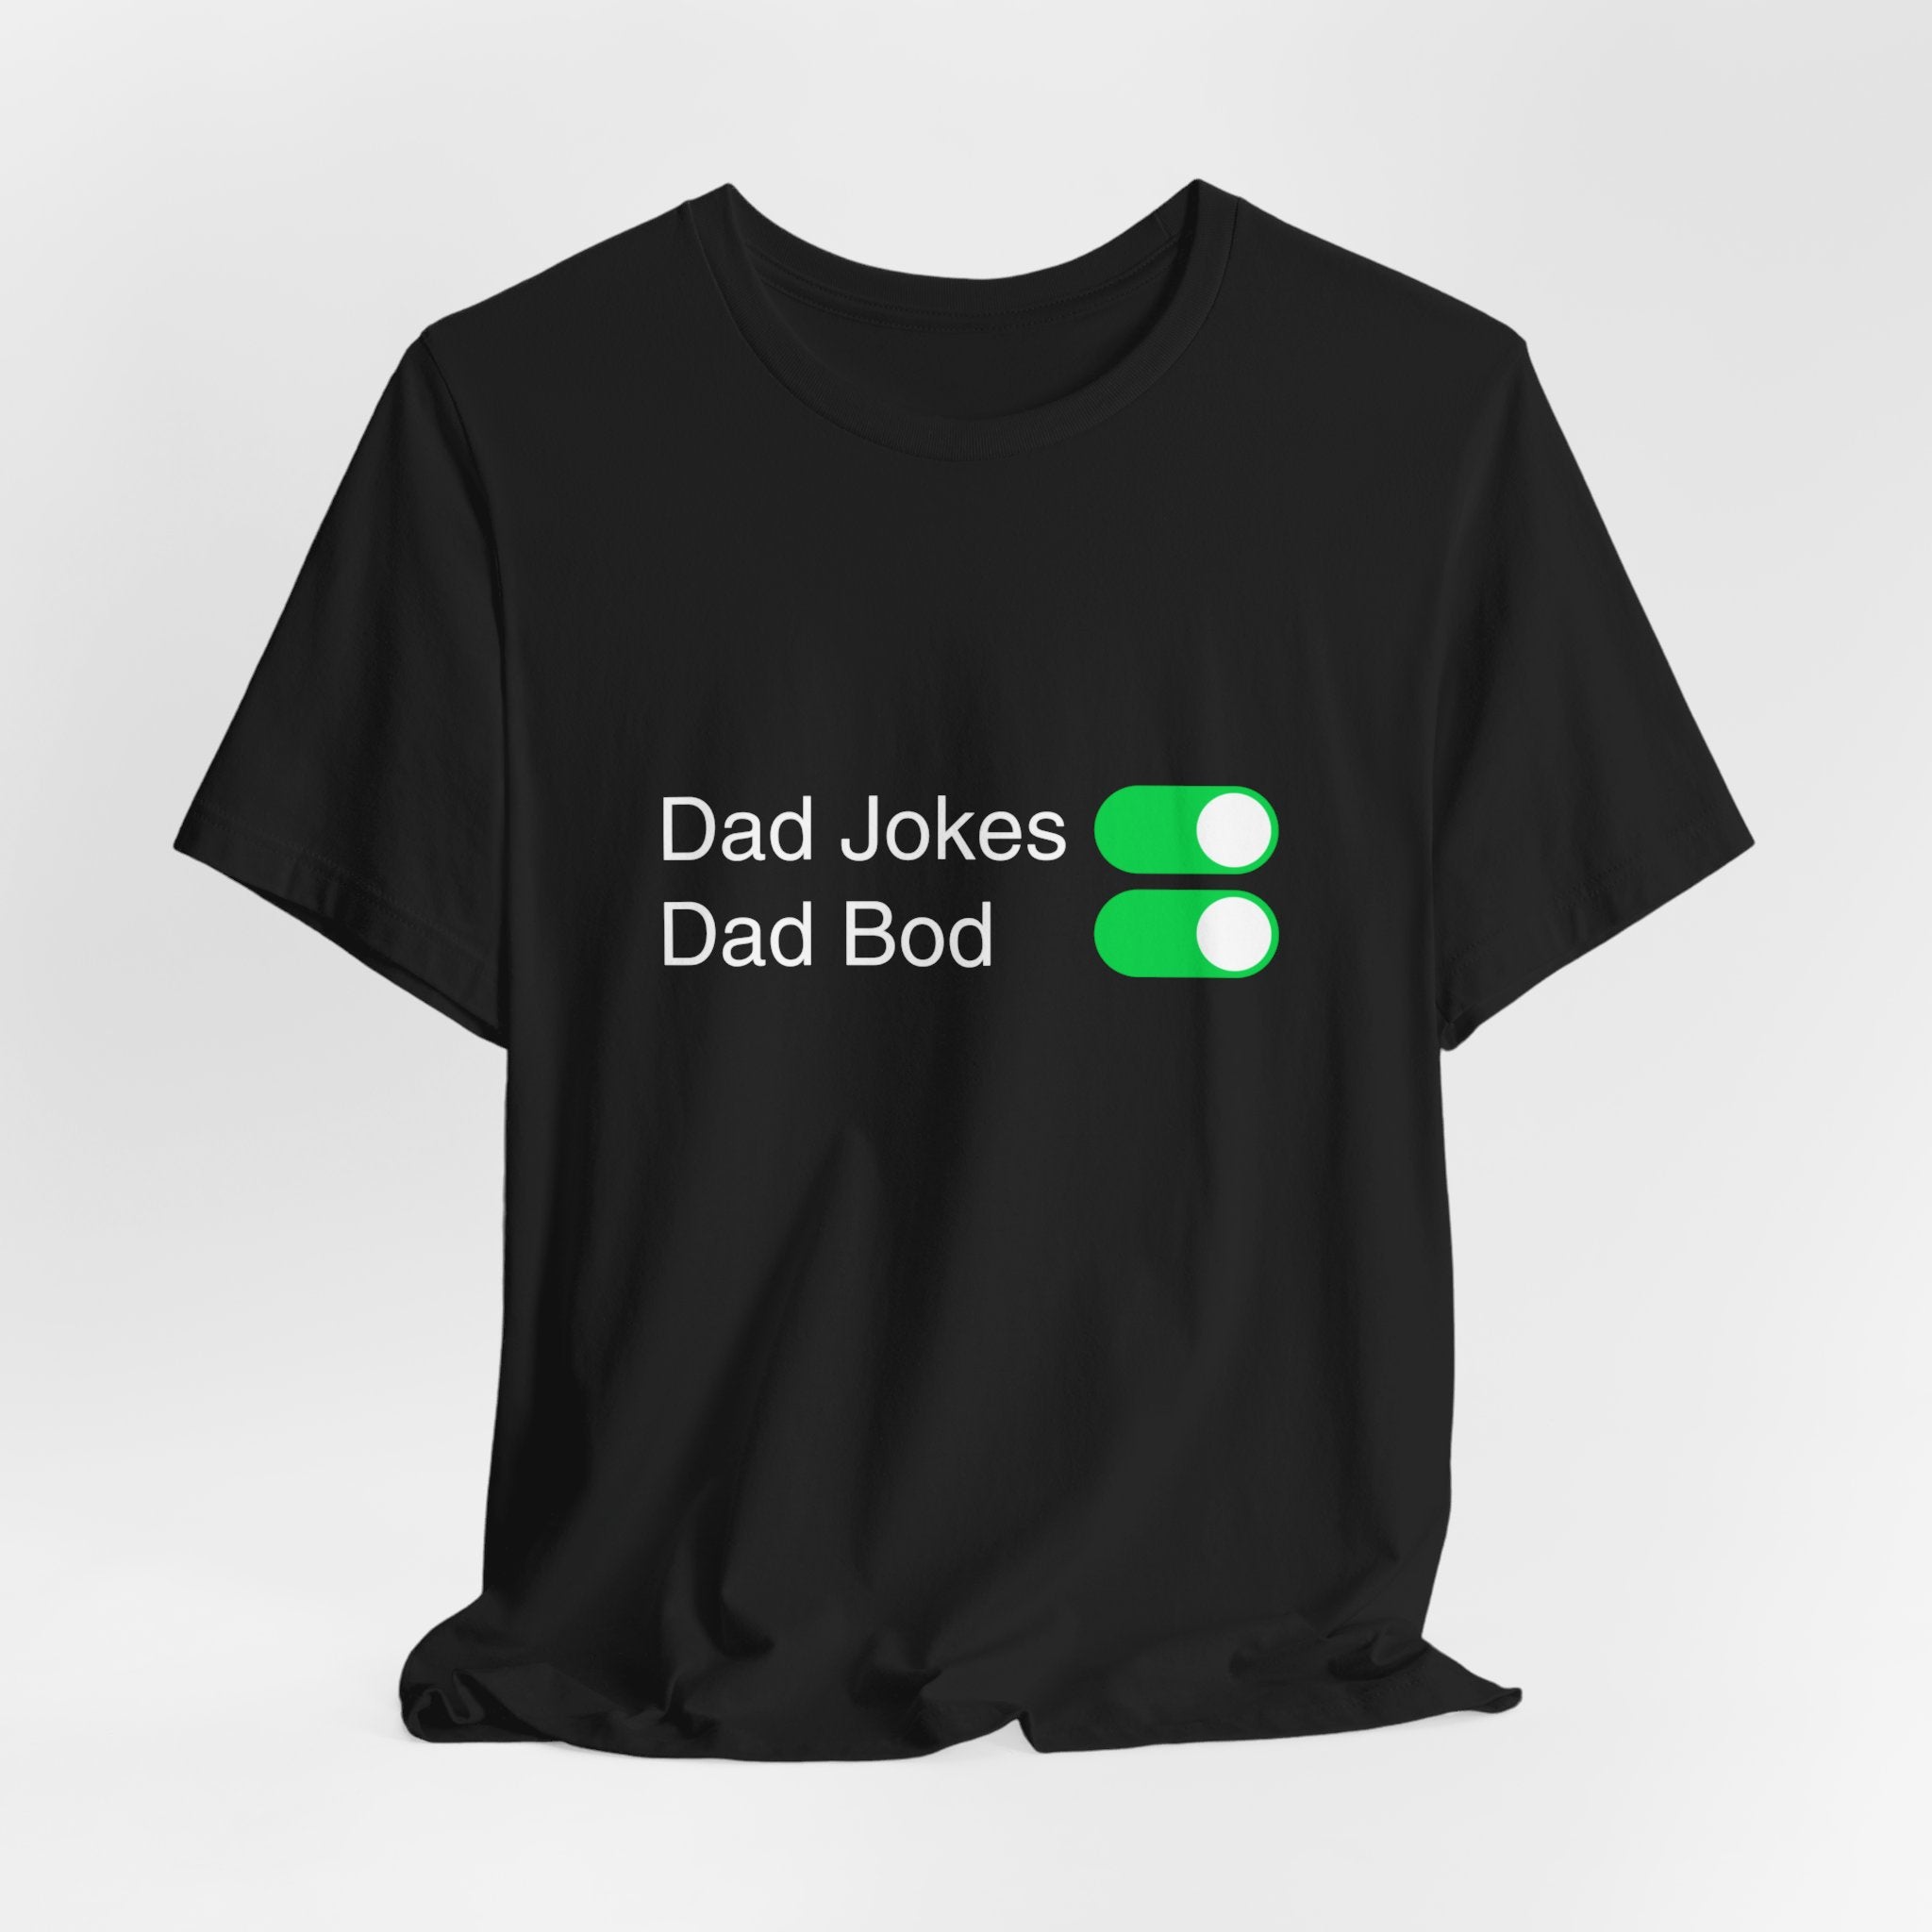 Dad Jokes Dad Bod On Shirt Funny Father’s Day Tee